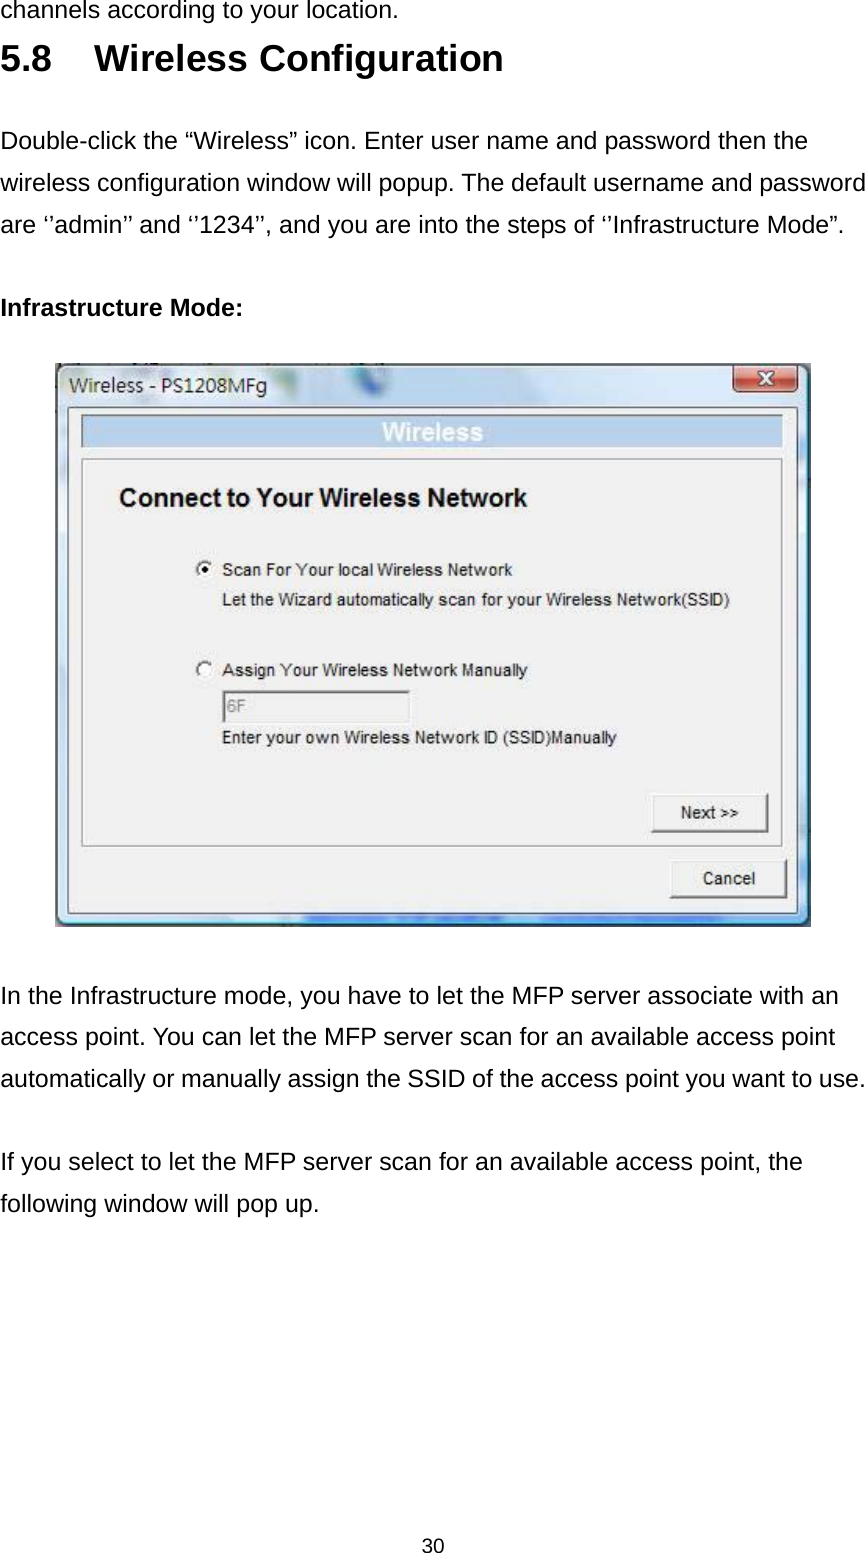 30 channels according to your location. 5.8 Wireless Configuration Double-click the “Wireless” icon. Enter user name and password then the wireless configuration window will popup. The default username and password are ‘’admin’’ and ‘’1234’’, and you are into the steps of ‘’Infrastructure Mode”.    Infrastructure Mode:    In the Infrastructure mode, you have to let the MFP server associate with an access point. You can let the MFP server scan for an available access point automatically or manually assign the SSID of the access point you want to use.    If you select to let the MFP server scan for an available access point, the following window will pop up.  